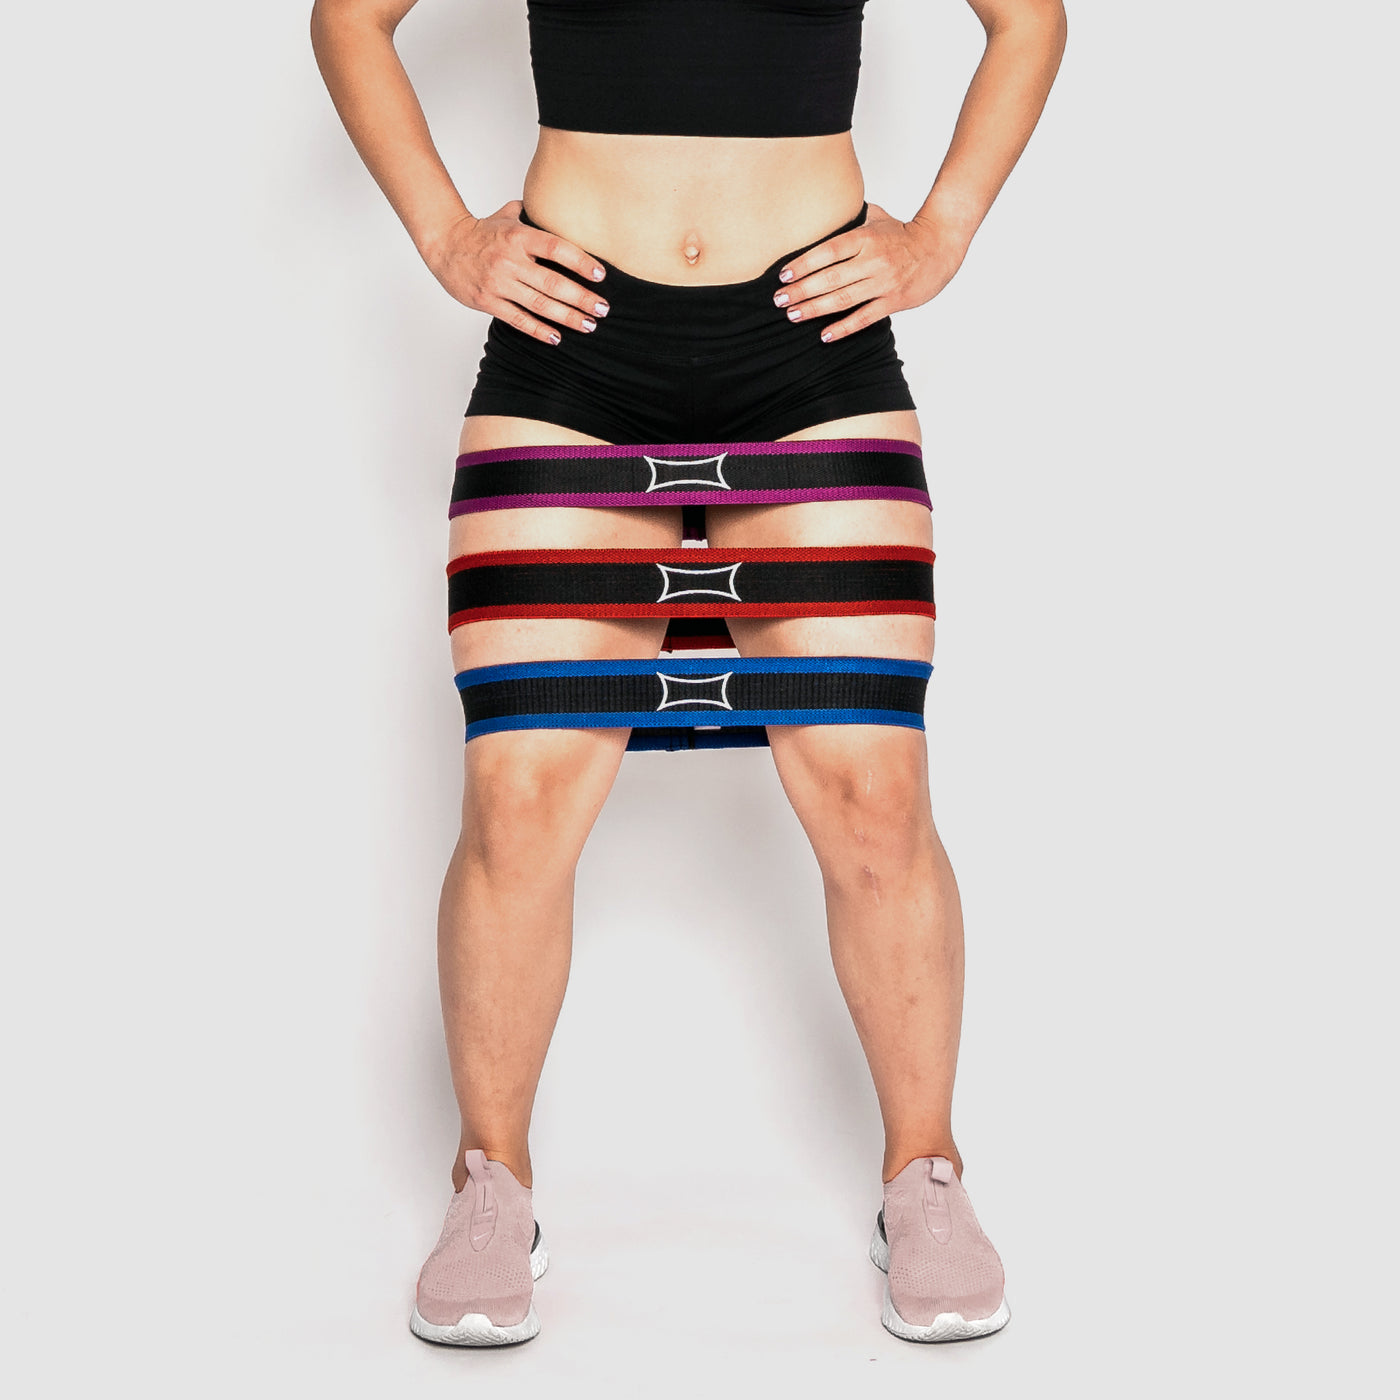 Hip Circle Bands: Strengthen Your Glutes With These Simple DIY